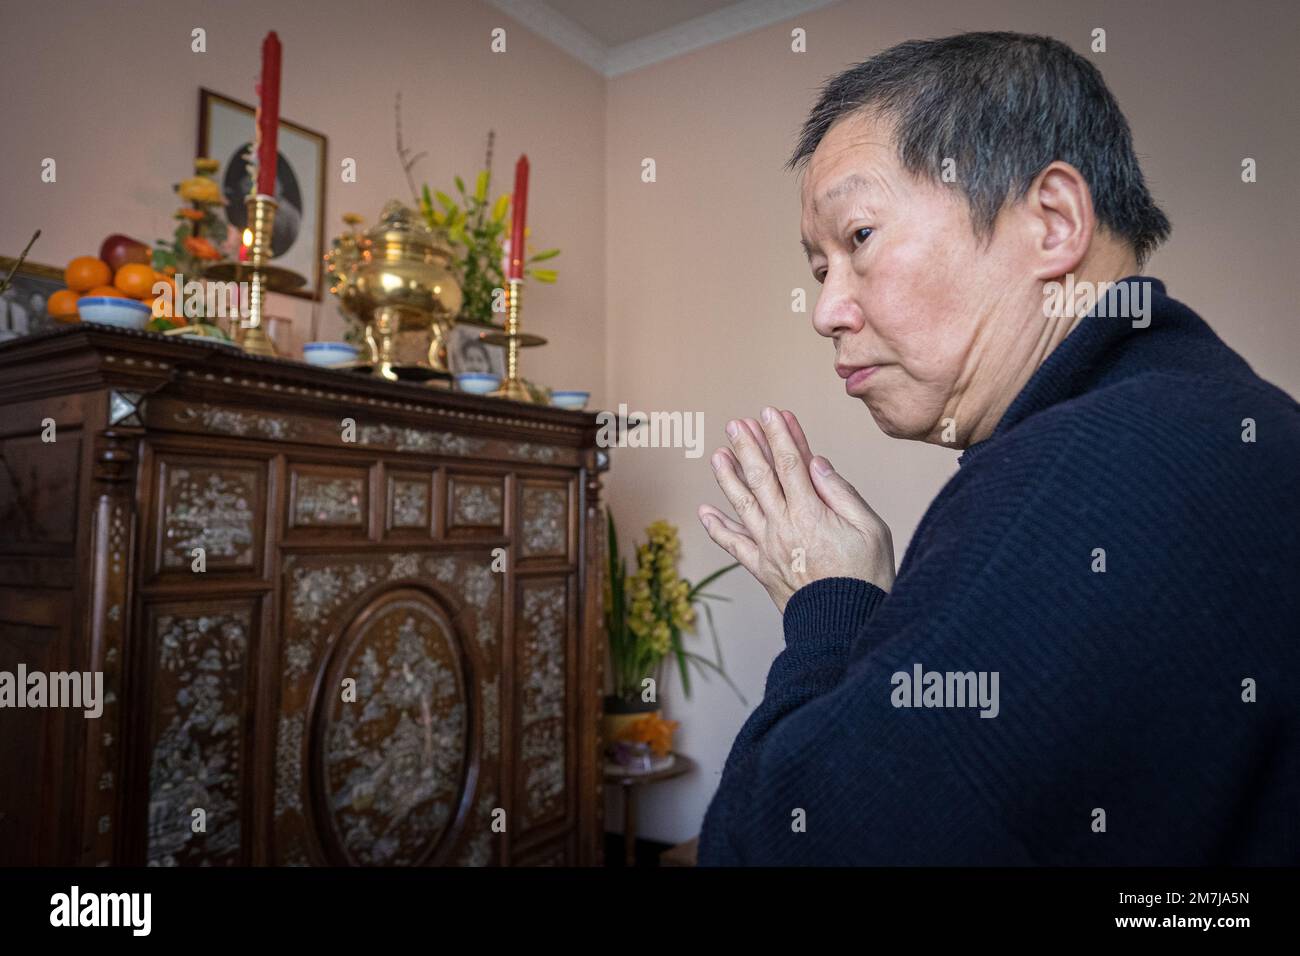 Olivier Donnars / Le Pictorium -  Tet, Vietnamese New Year -  7/2/2016  -  France / Ile-de-France (region)  -  On the occasion of Tet, the Vietnamese Stock Photo